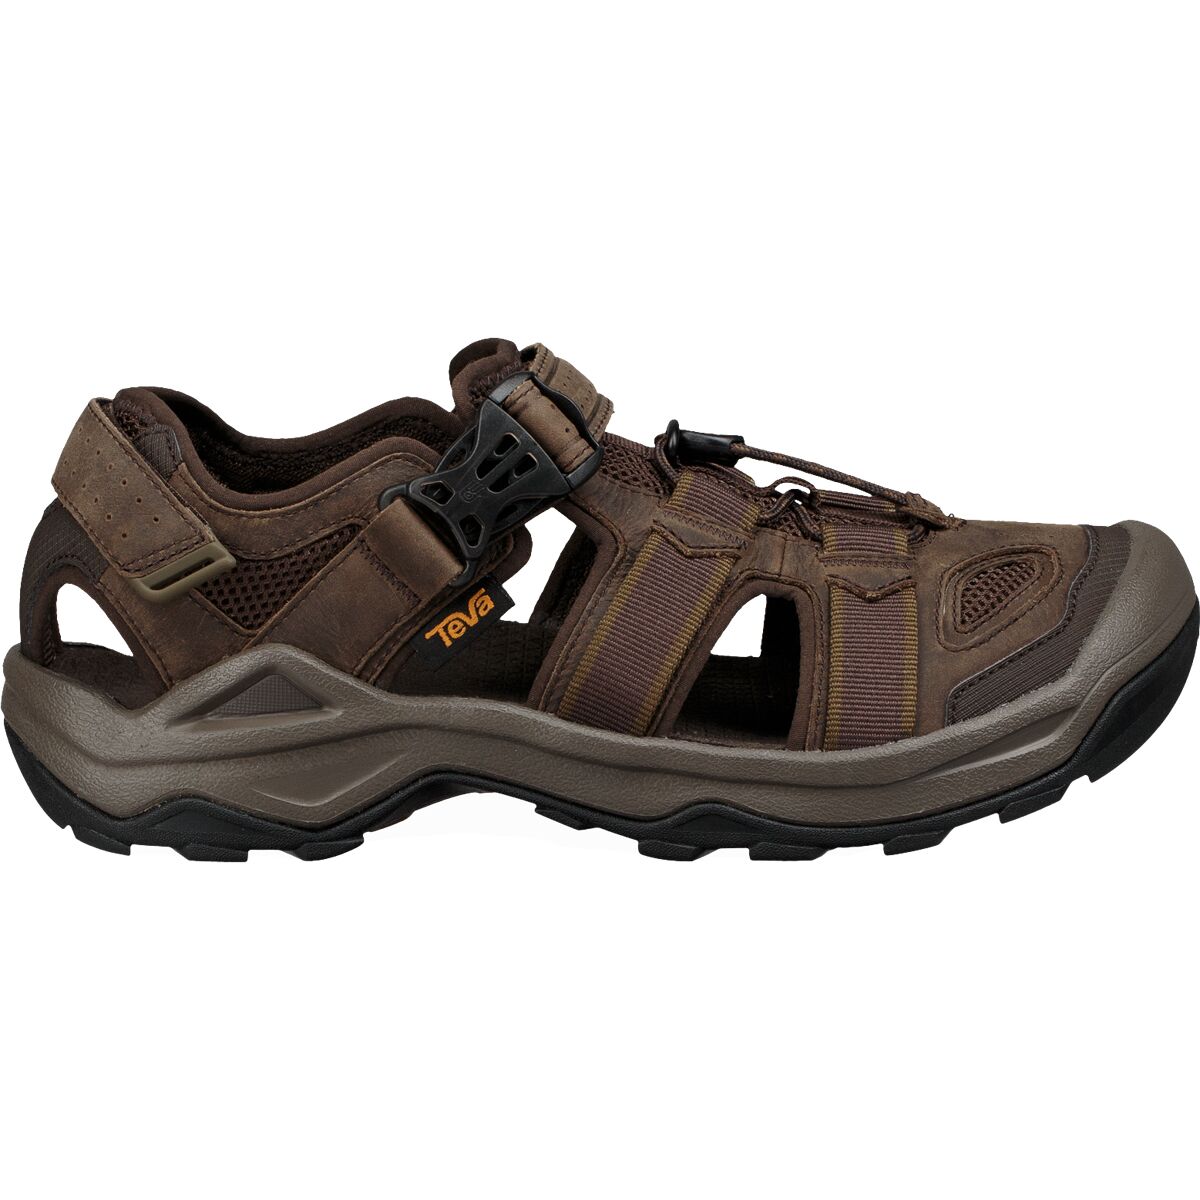 Teva - Men's Casual Fashion Shoes and Sneakers